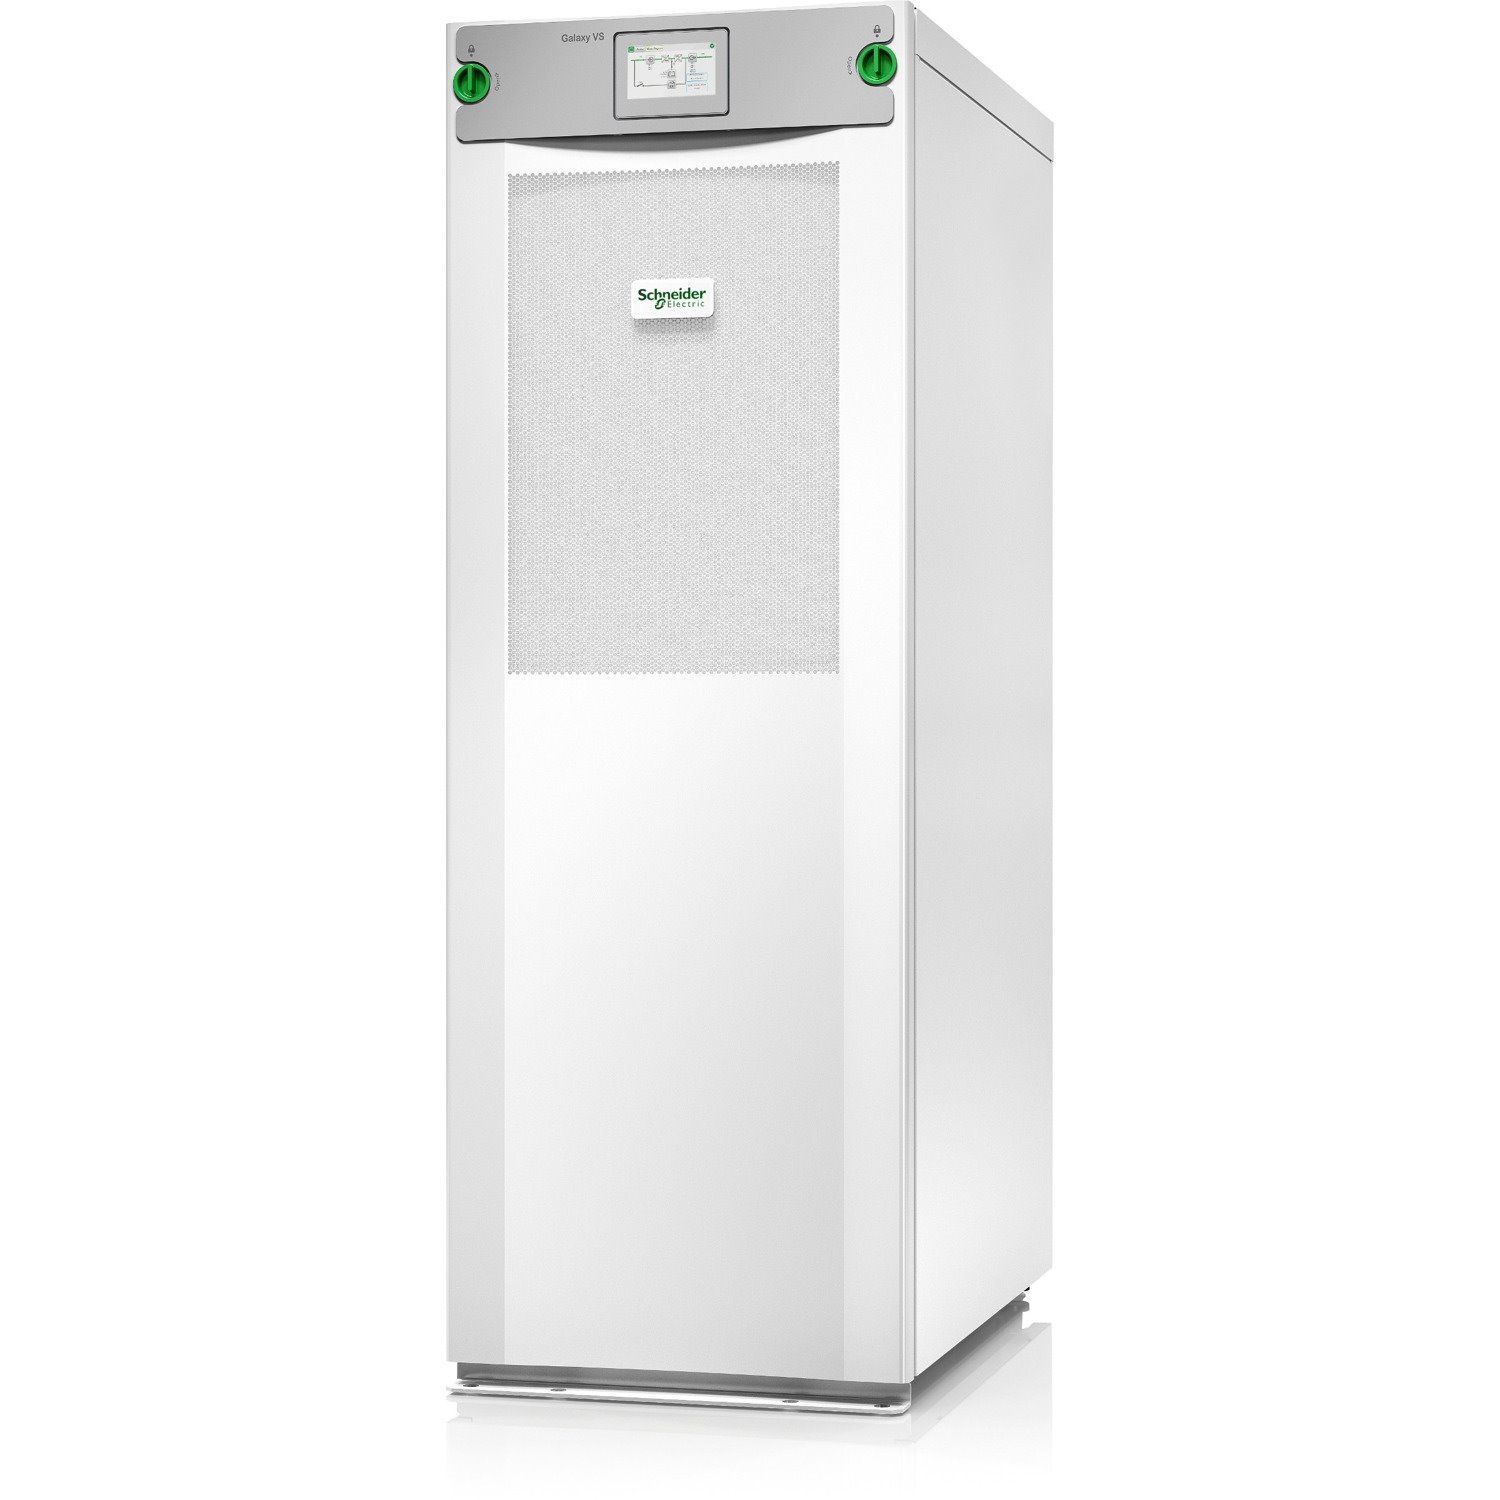 APC by Schneider Electric Galaxy VS Double Conversion Online UPS - 30 kVA - Three Phase